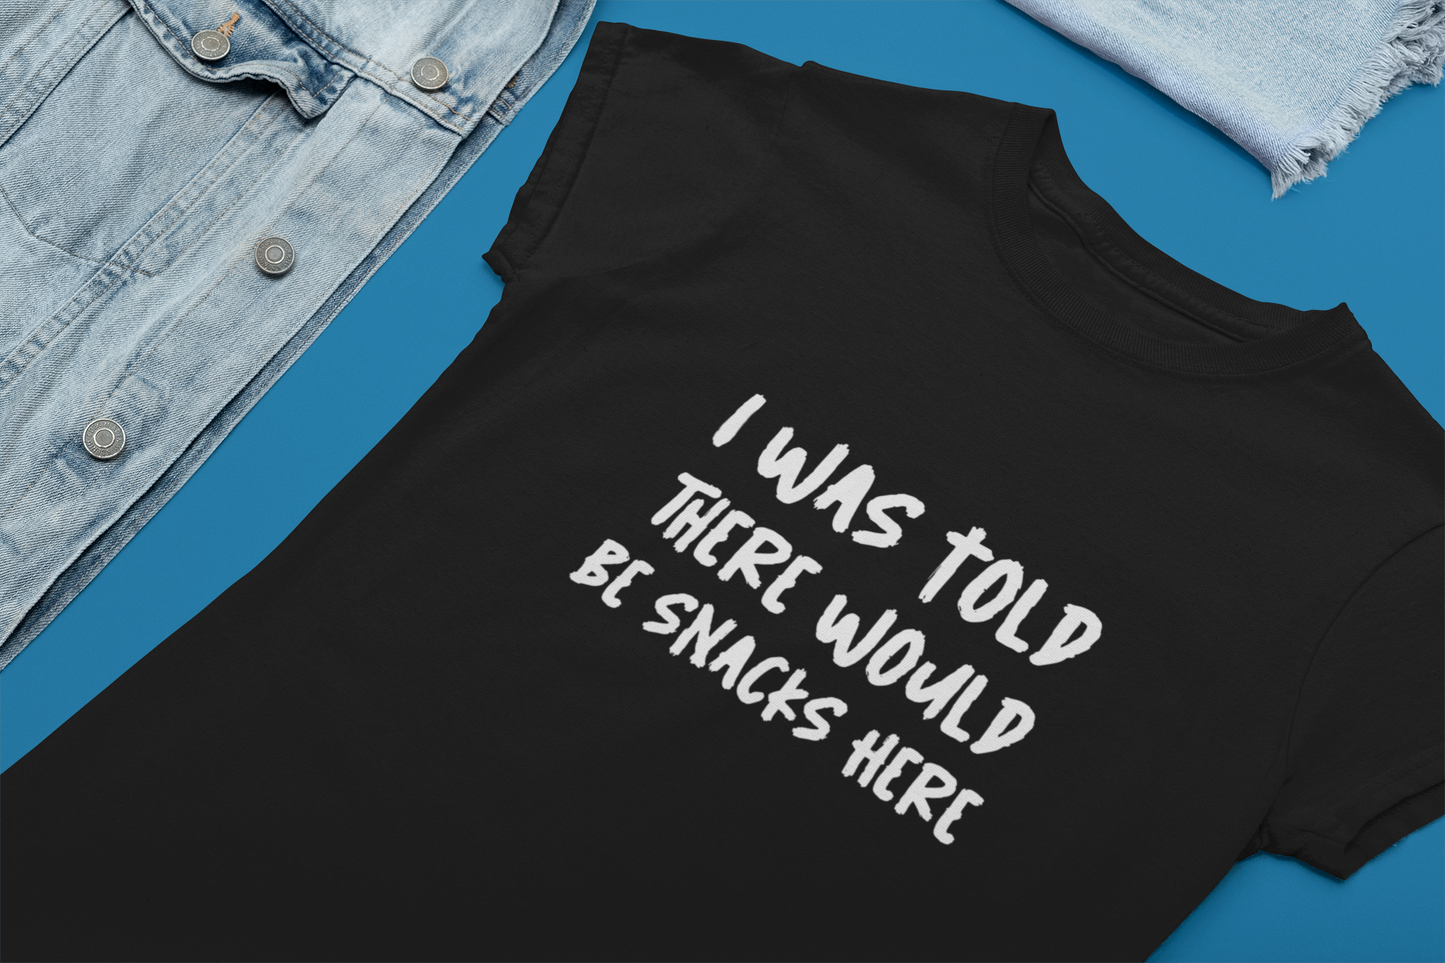 1 I was told there would be snacks here Obnoxious Women Shirt